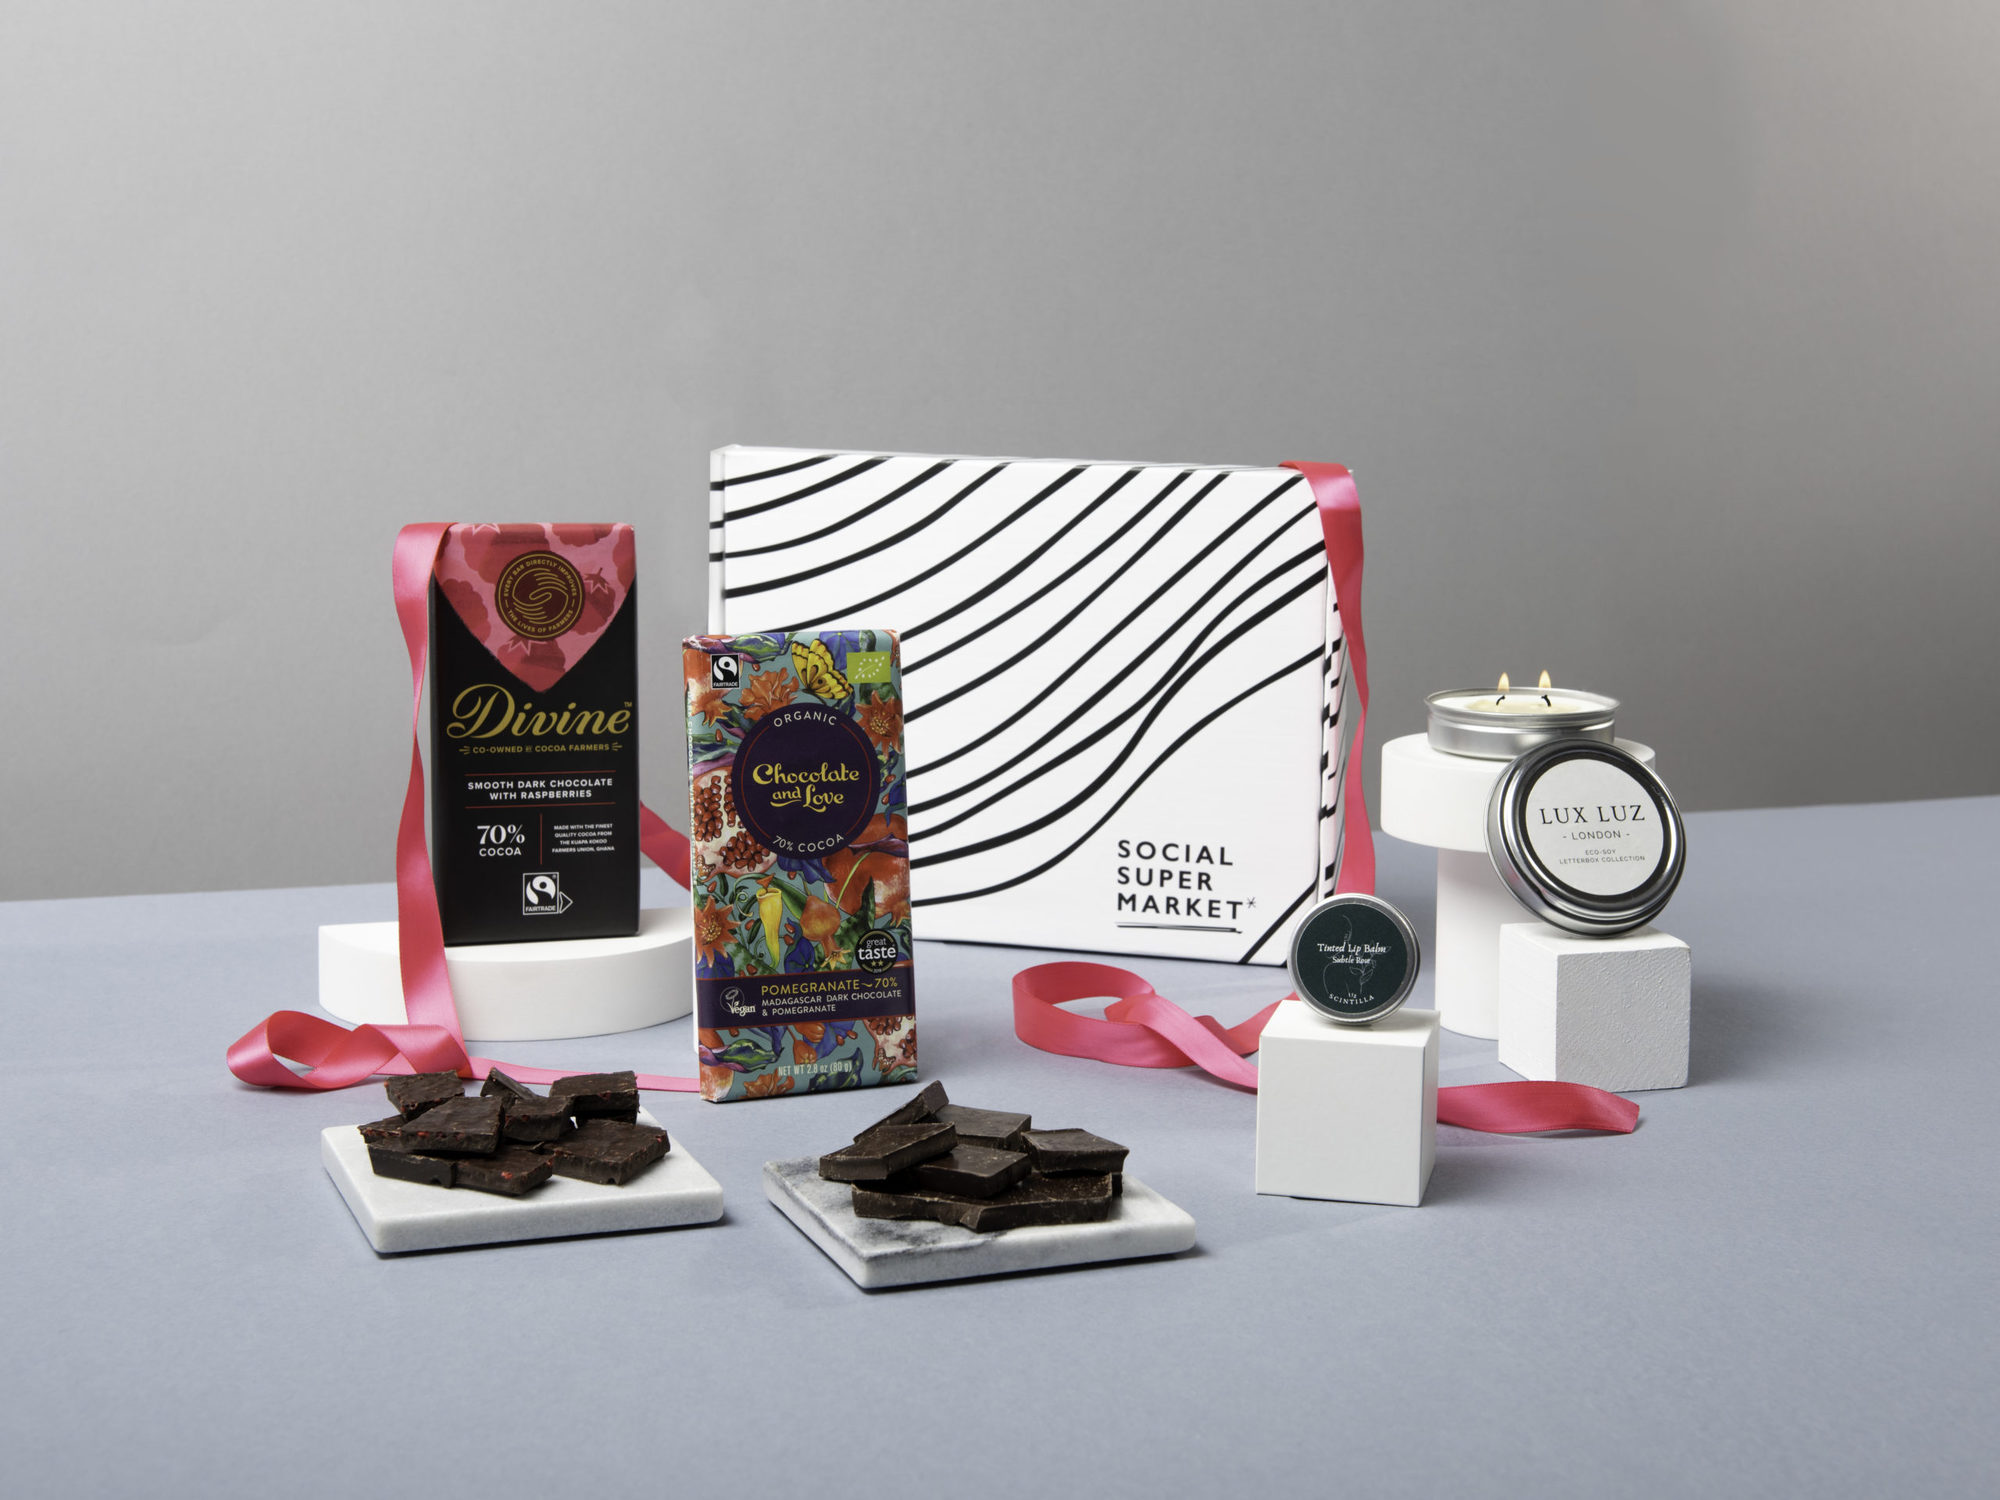 The Be My BFF Valentine's Day Letterbox Gift,  with its contents surrounding the box they come in – including Divine Chocolate and Chocolate and Love chocolate bars, a LUX LUZ eco-soy letterbox candle and a Scintilla tinted lip balm. They're surrounded by draped hot pink ribbon.